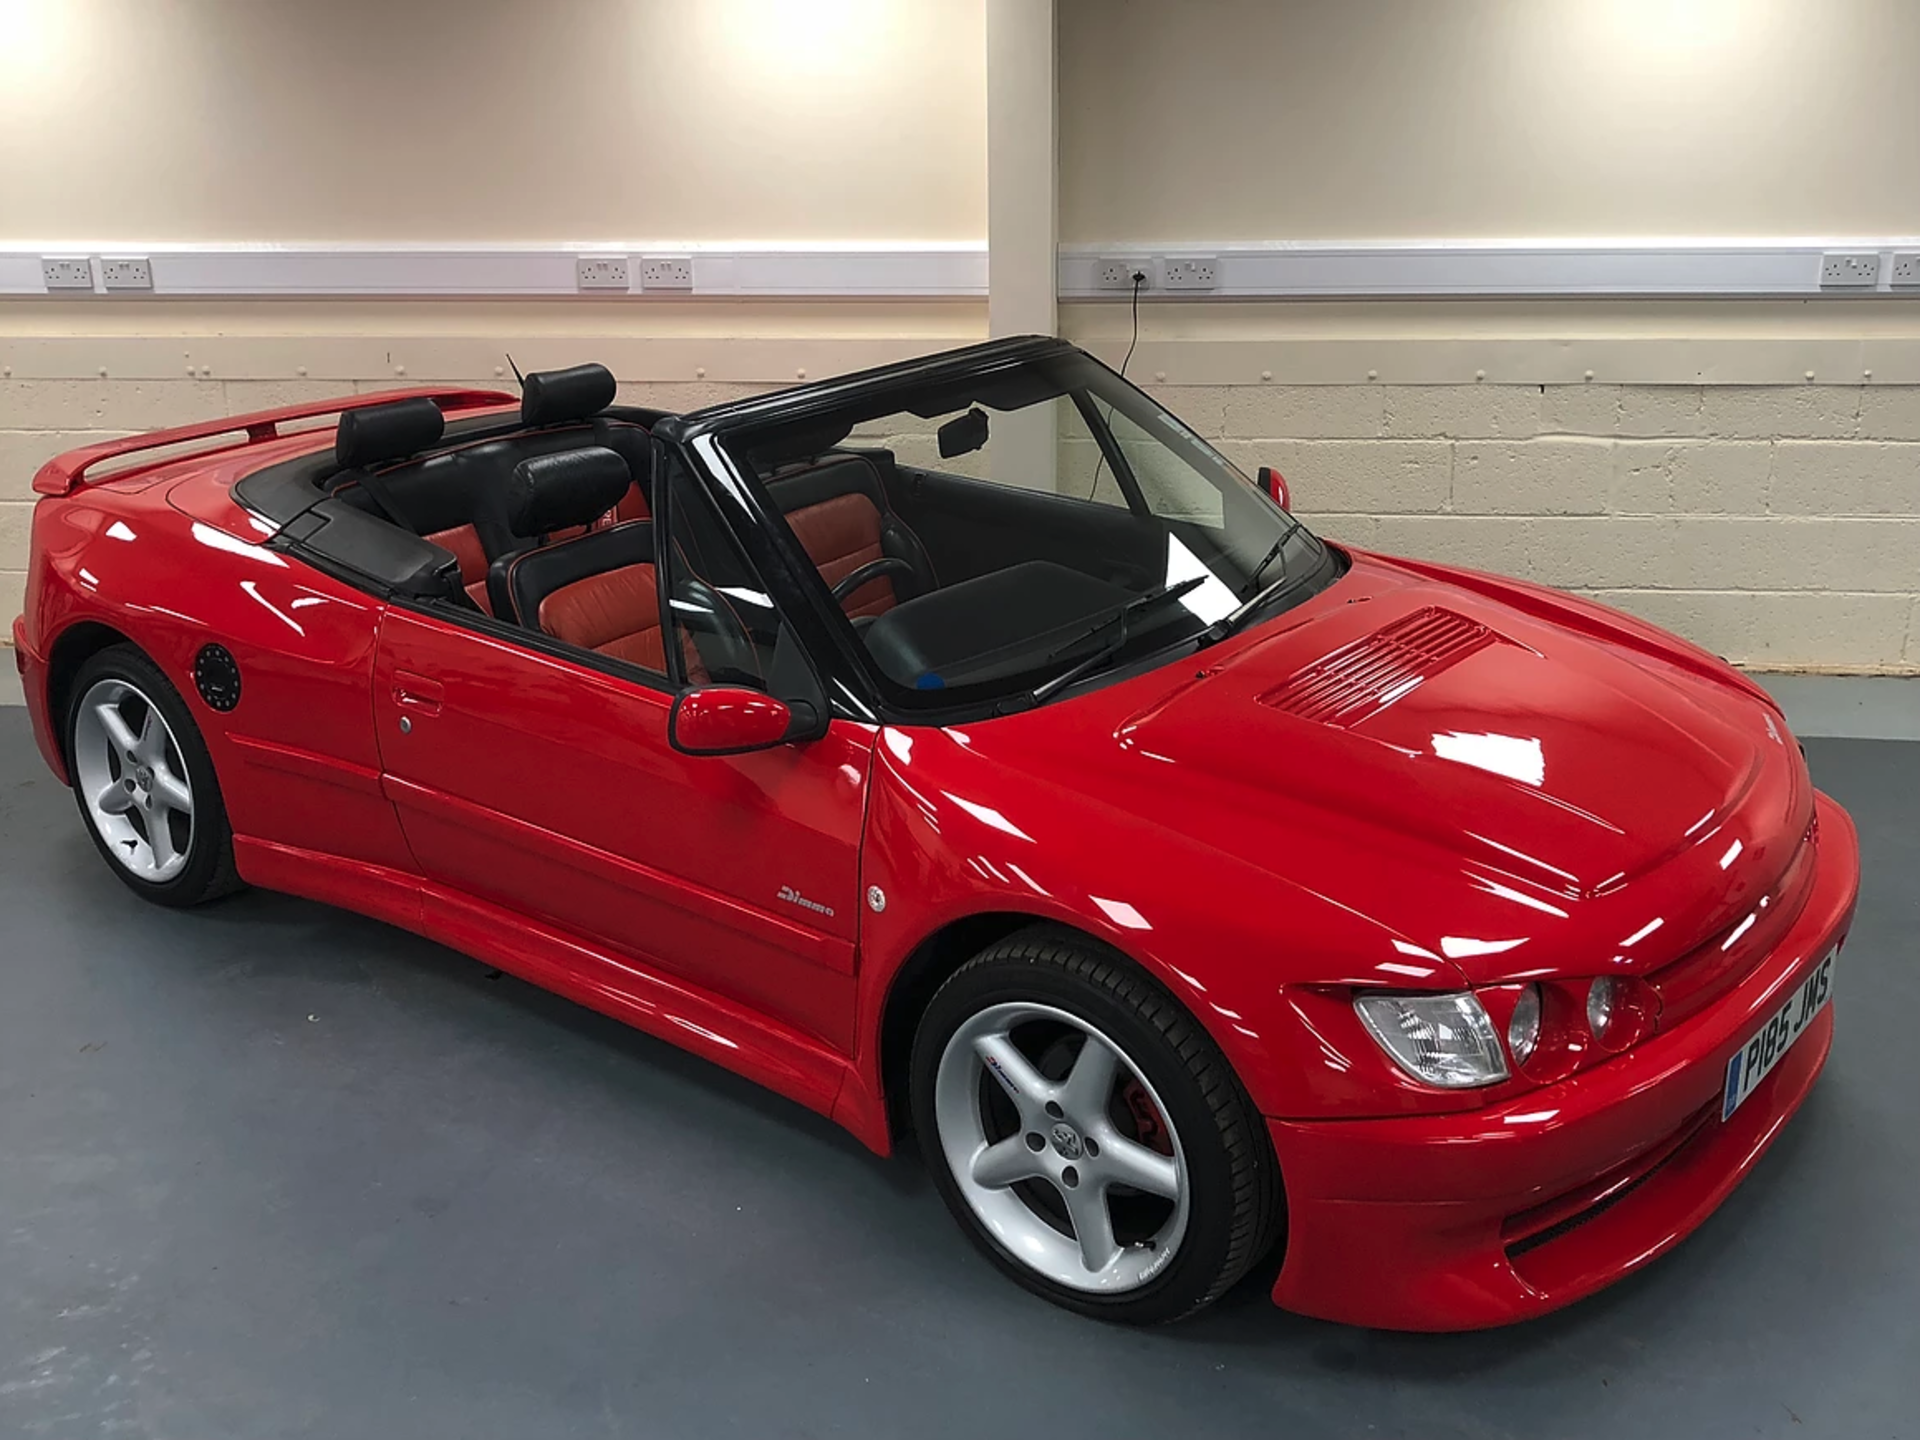 Peugeot 306 2.0i Cabriolet - Dimma prototype. Number 1 of only 2 ever built. - Image 3 of 12